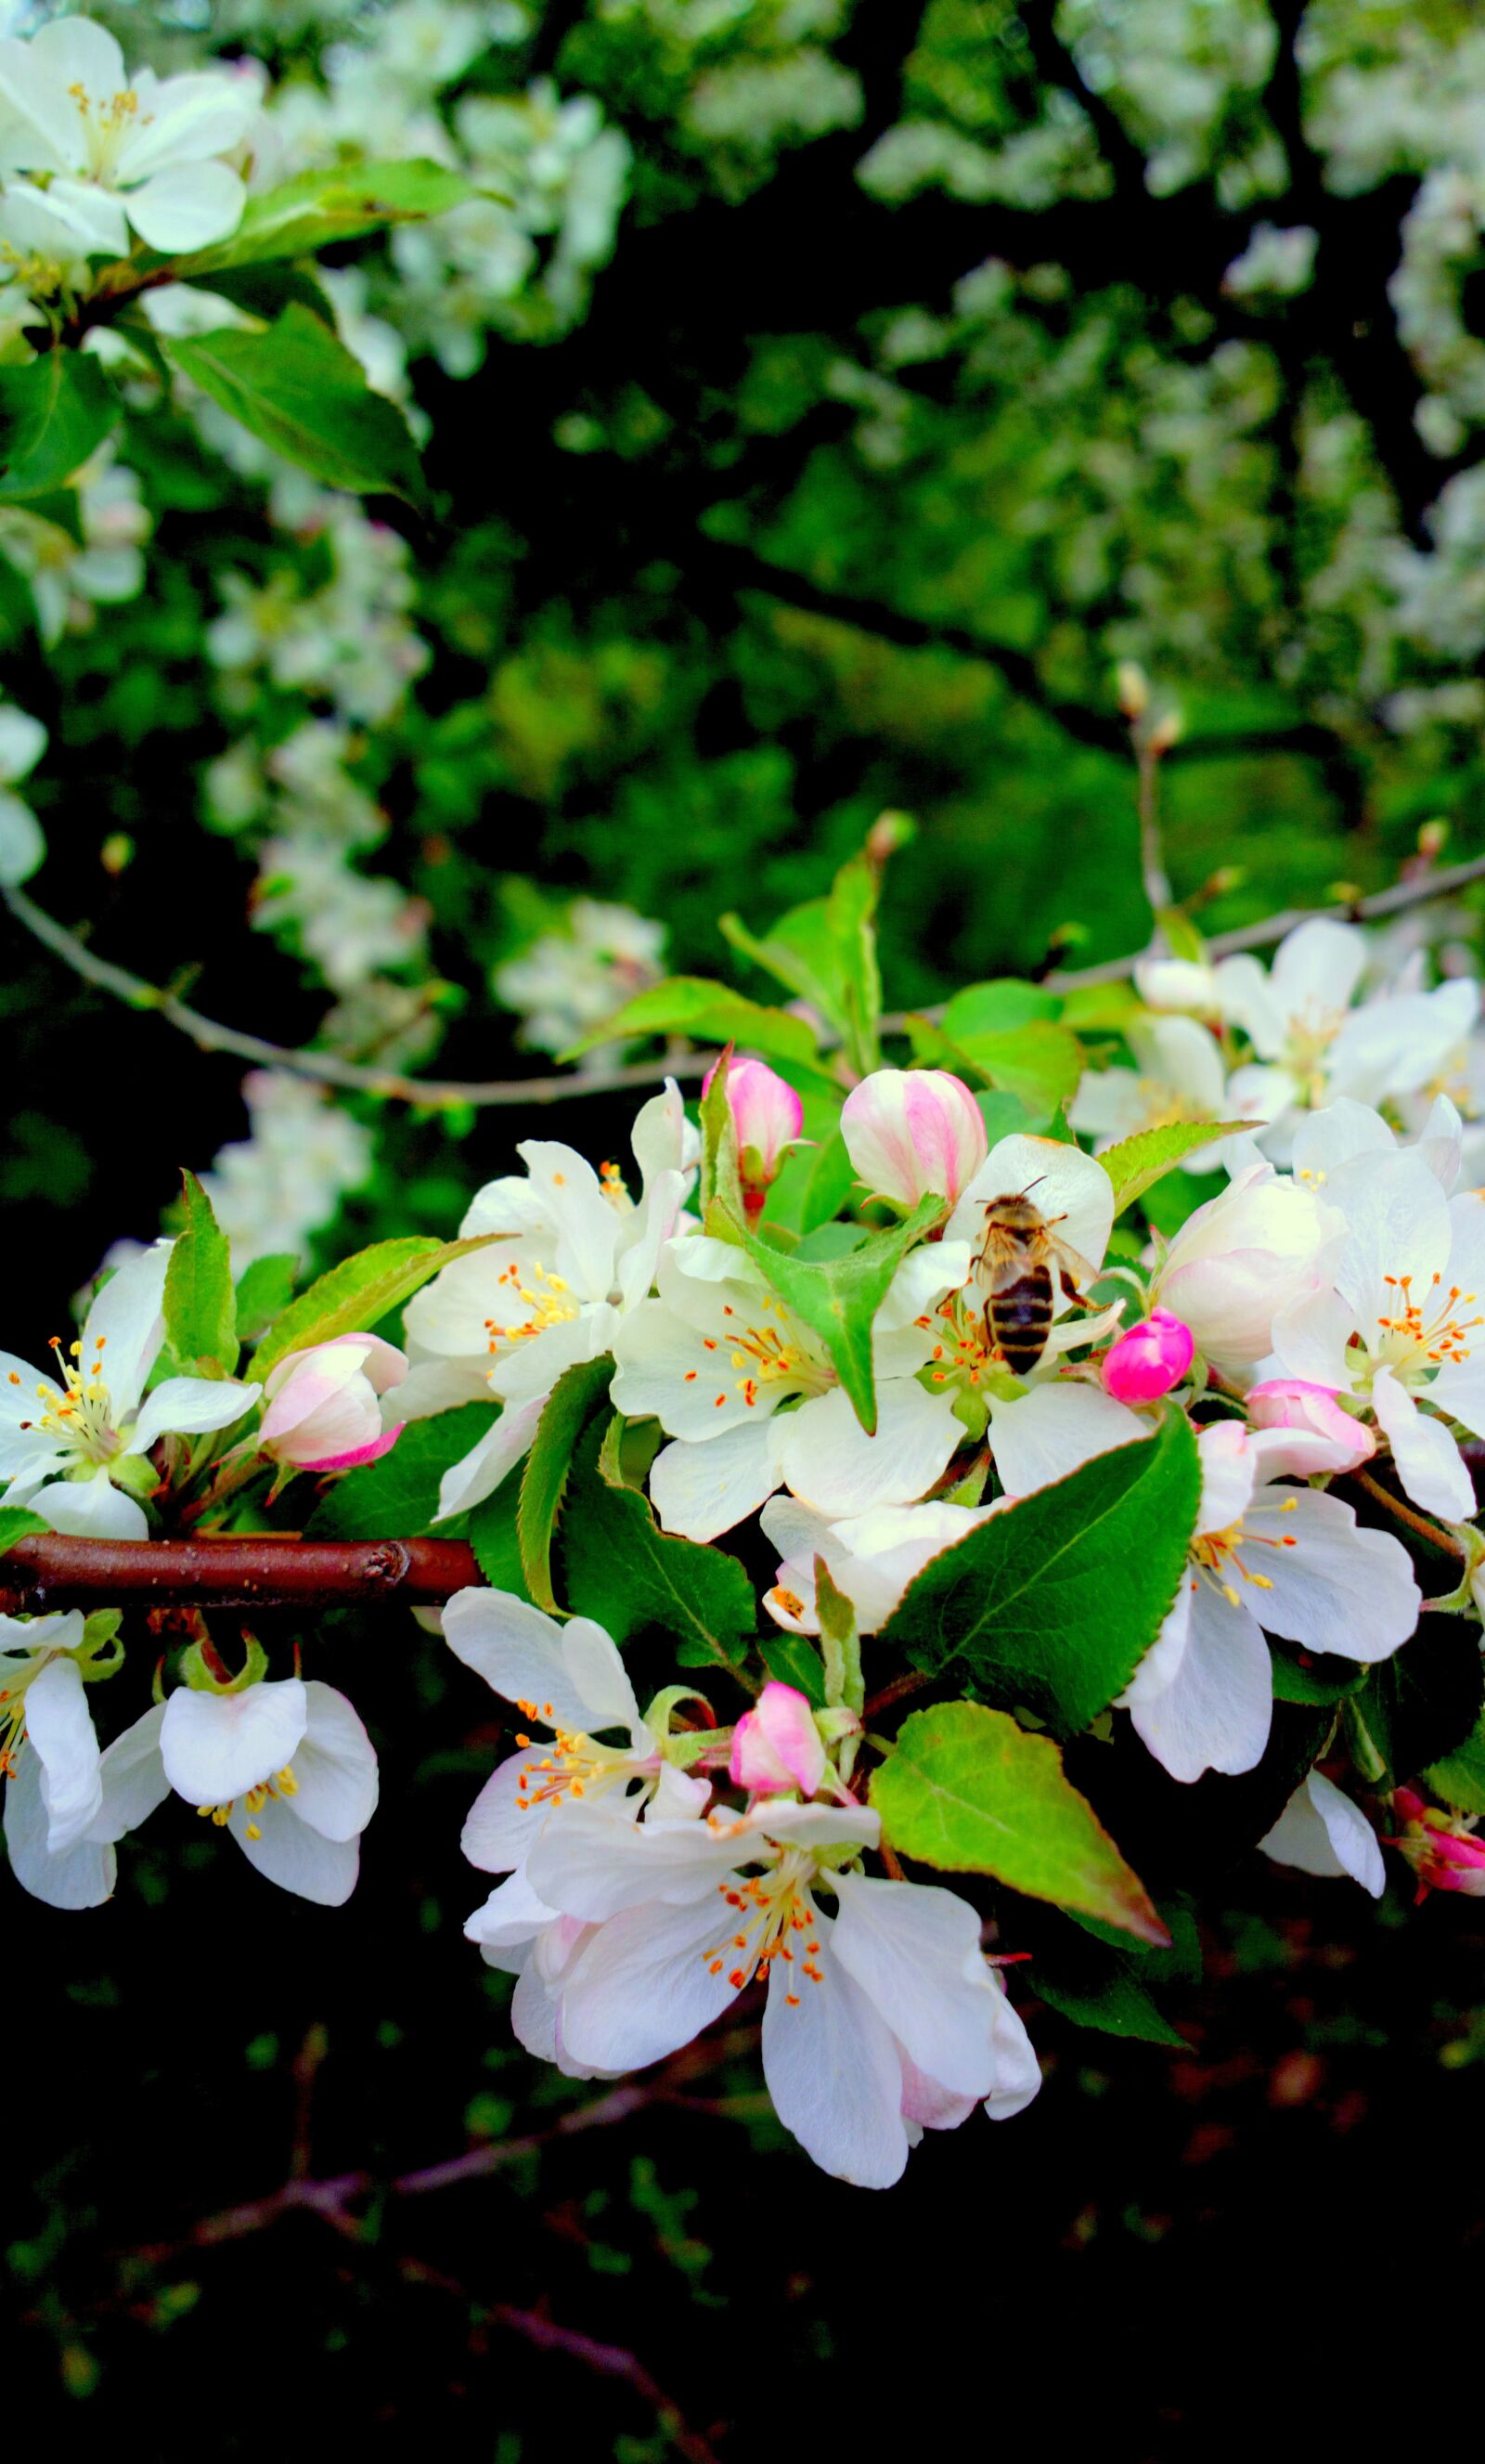 Nokia 808 PureView sample photo. Nature, in the spring photography